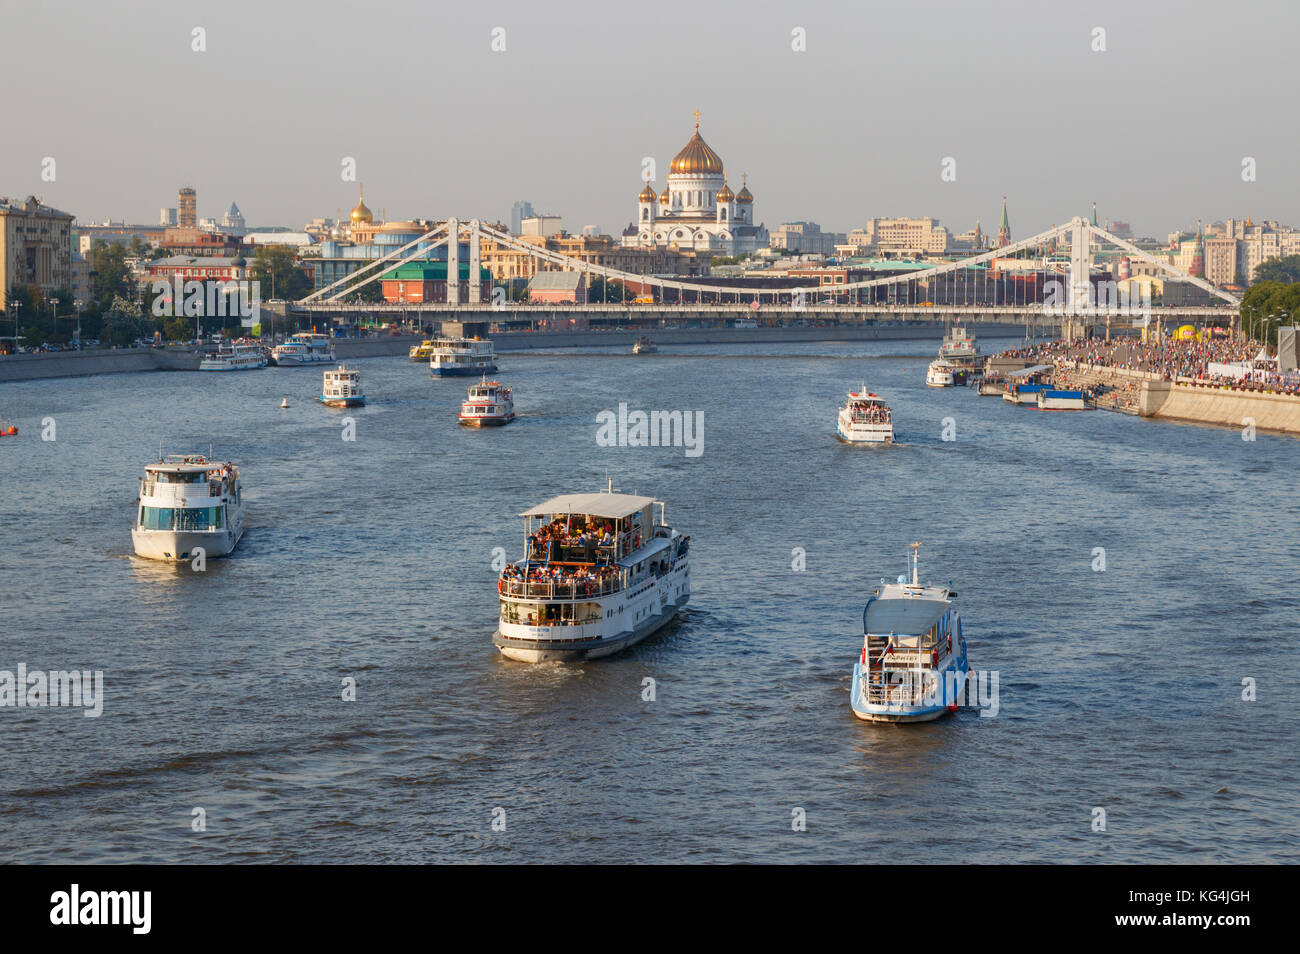 View of the Moskva river with several tourist boats and the Krymsky Bridge. Moscow, Russia. Stock Photo